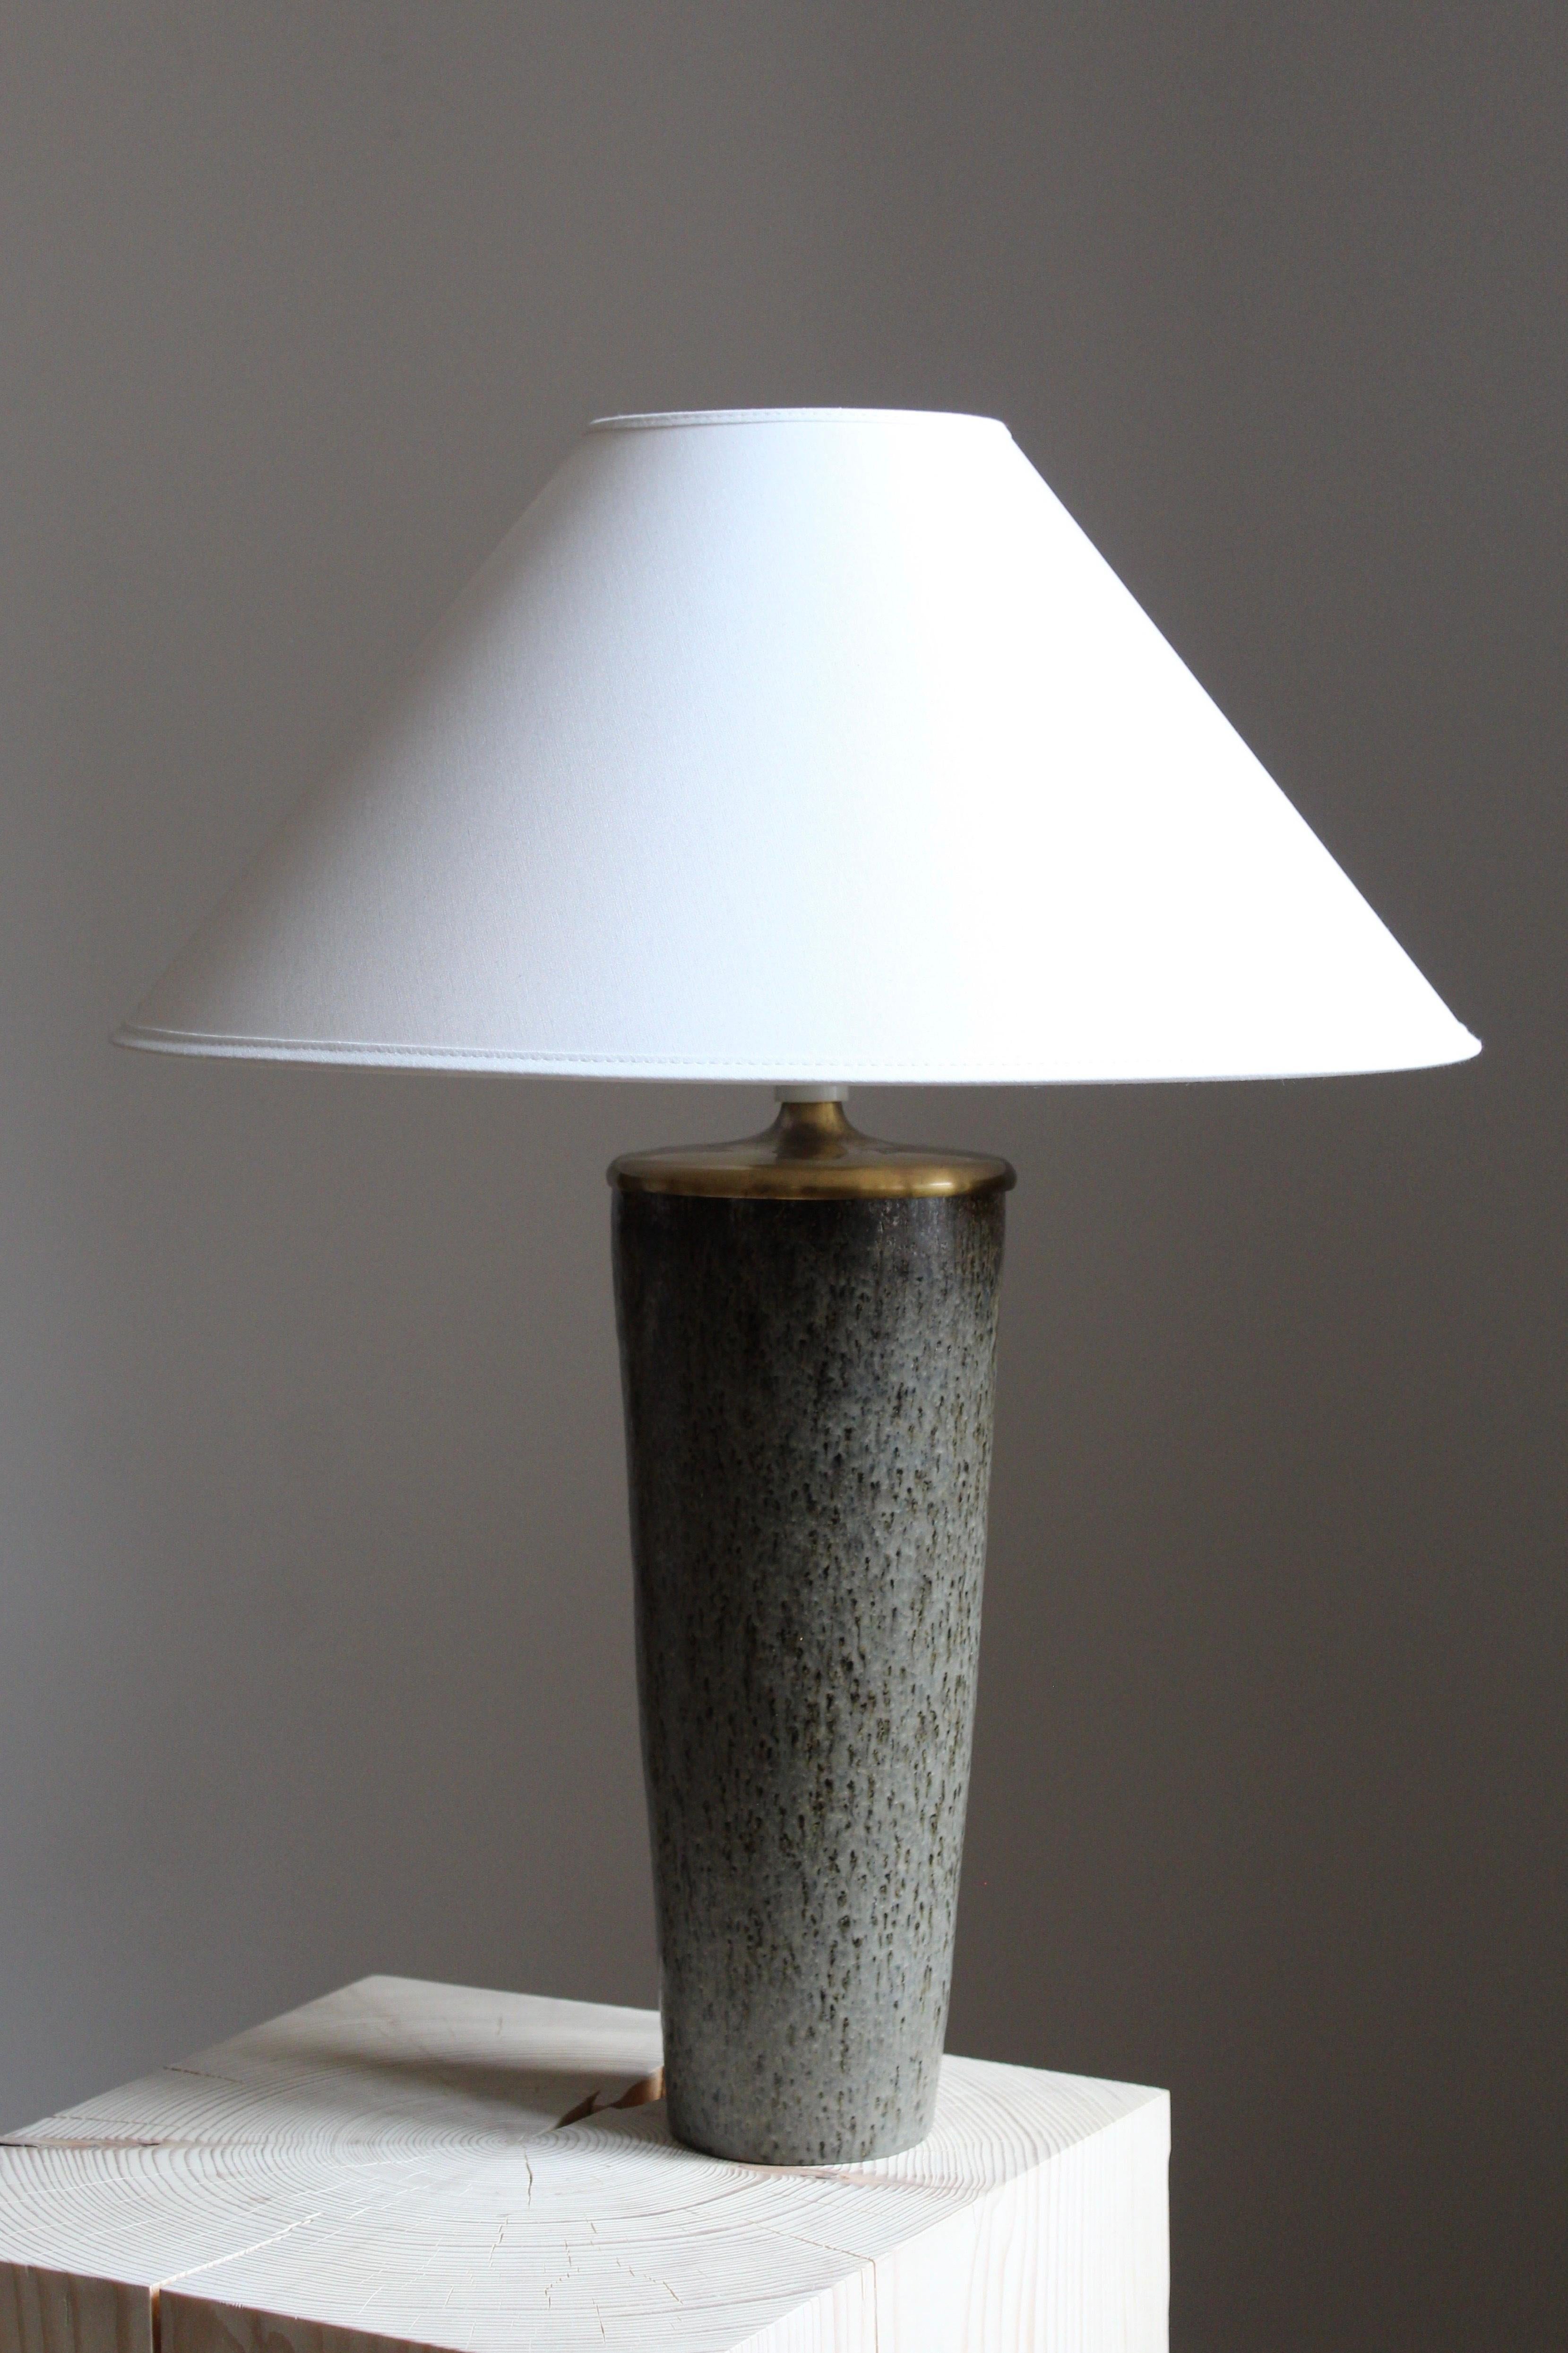 A sizable unique table lamp by Carl-Harry Stålhane for the iconic Swedish firm Rörstrand, 1950s, Sweden. Marked and signed.

Sold without a lampshade. Stated dimensions excluding lampshade.

Glaze features brown-grey colors.

Other ceramicists of